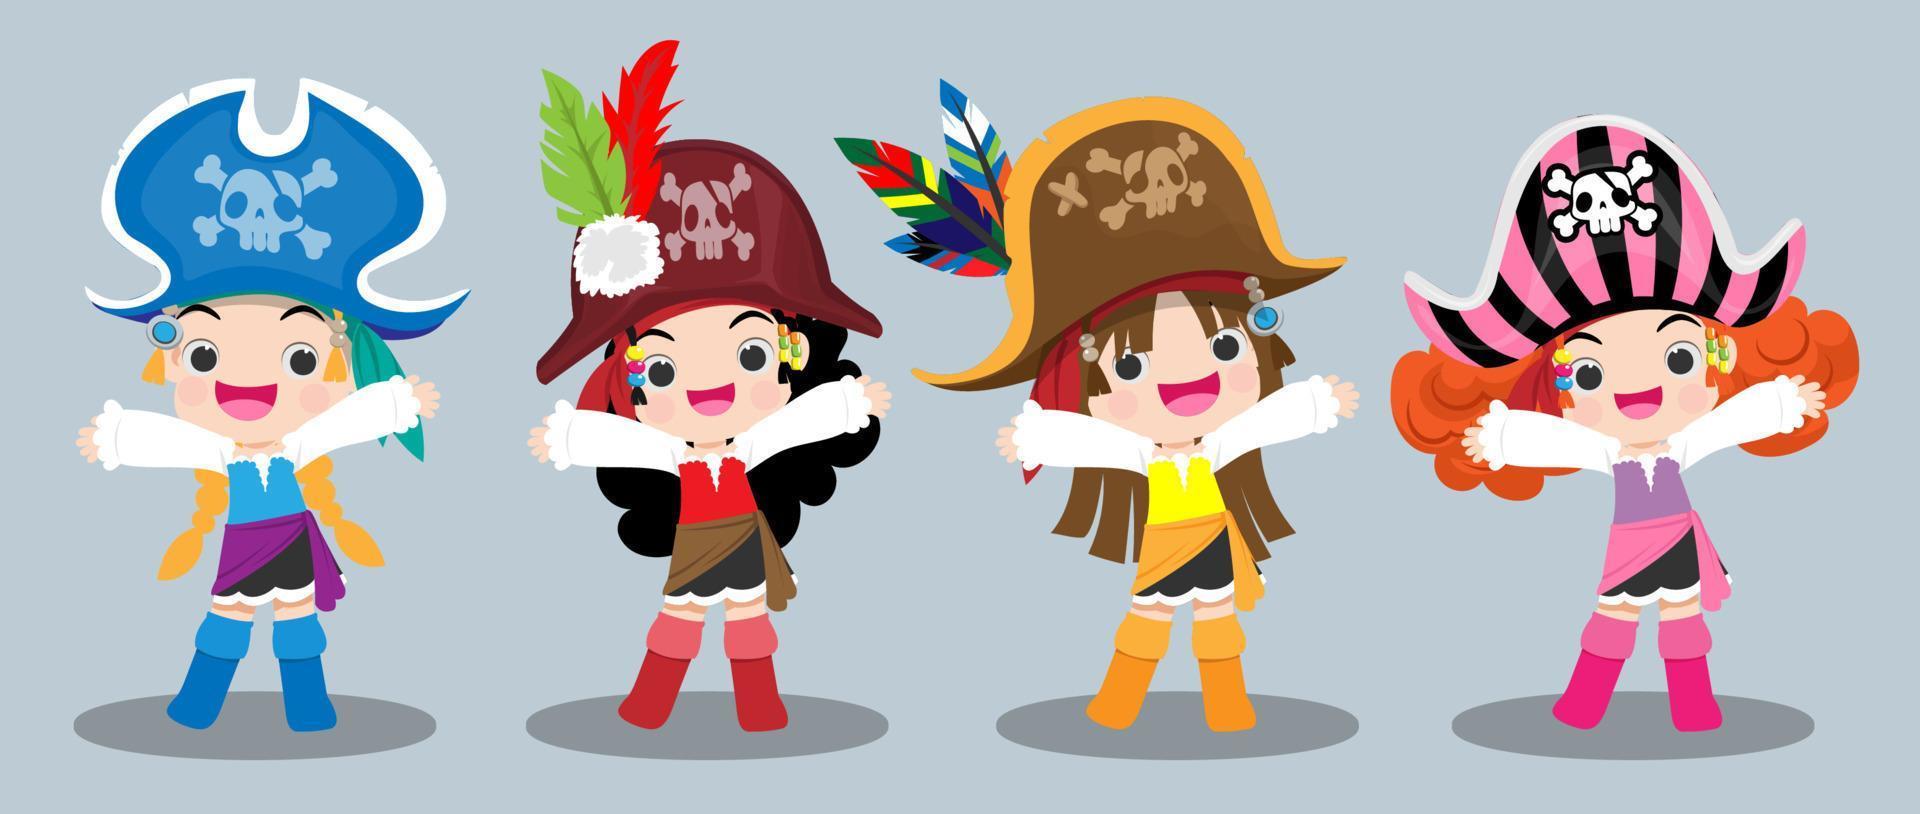 Cute pirate character wearing hat and standing with weapon. Marine travel and adventure design vector